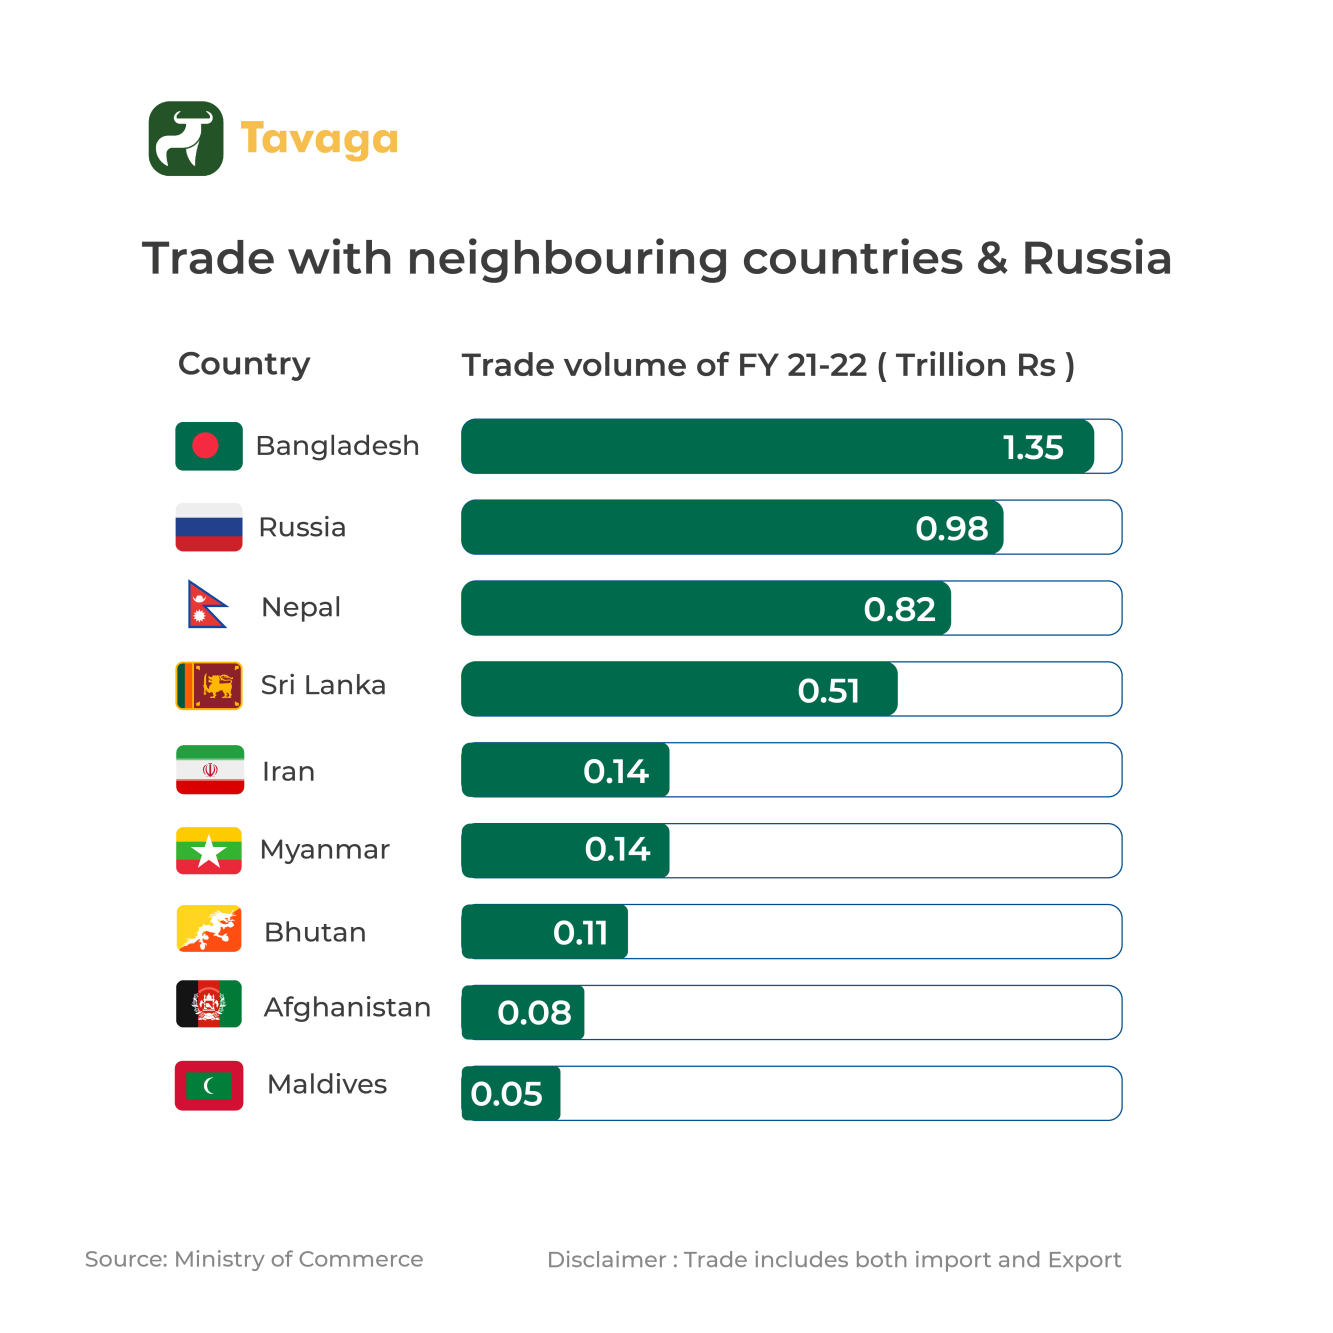 India's trade with neighbours and Russia